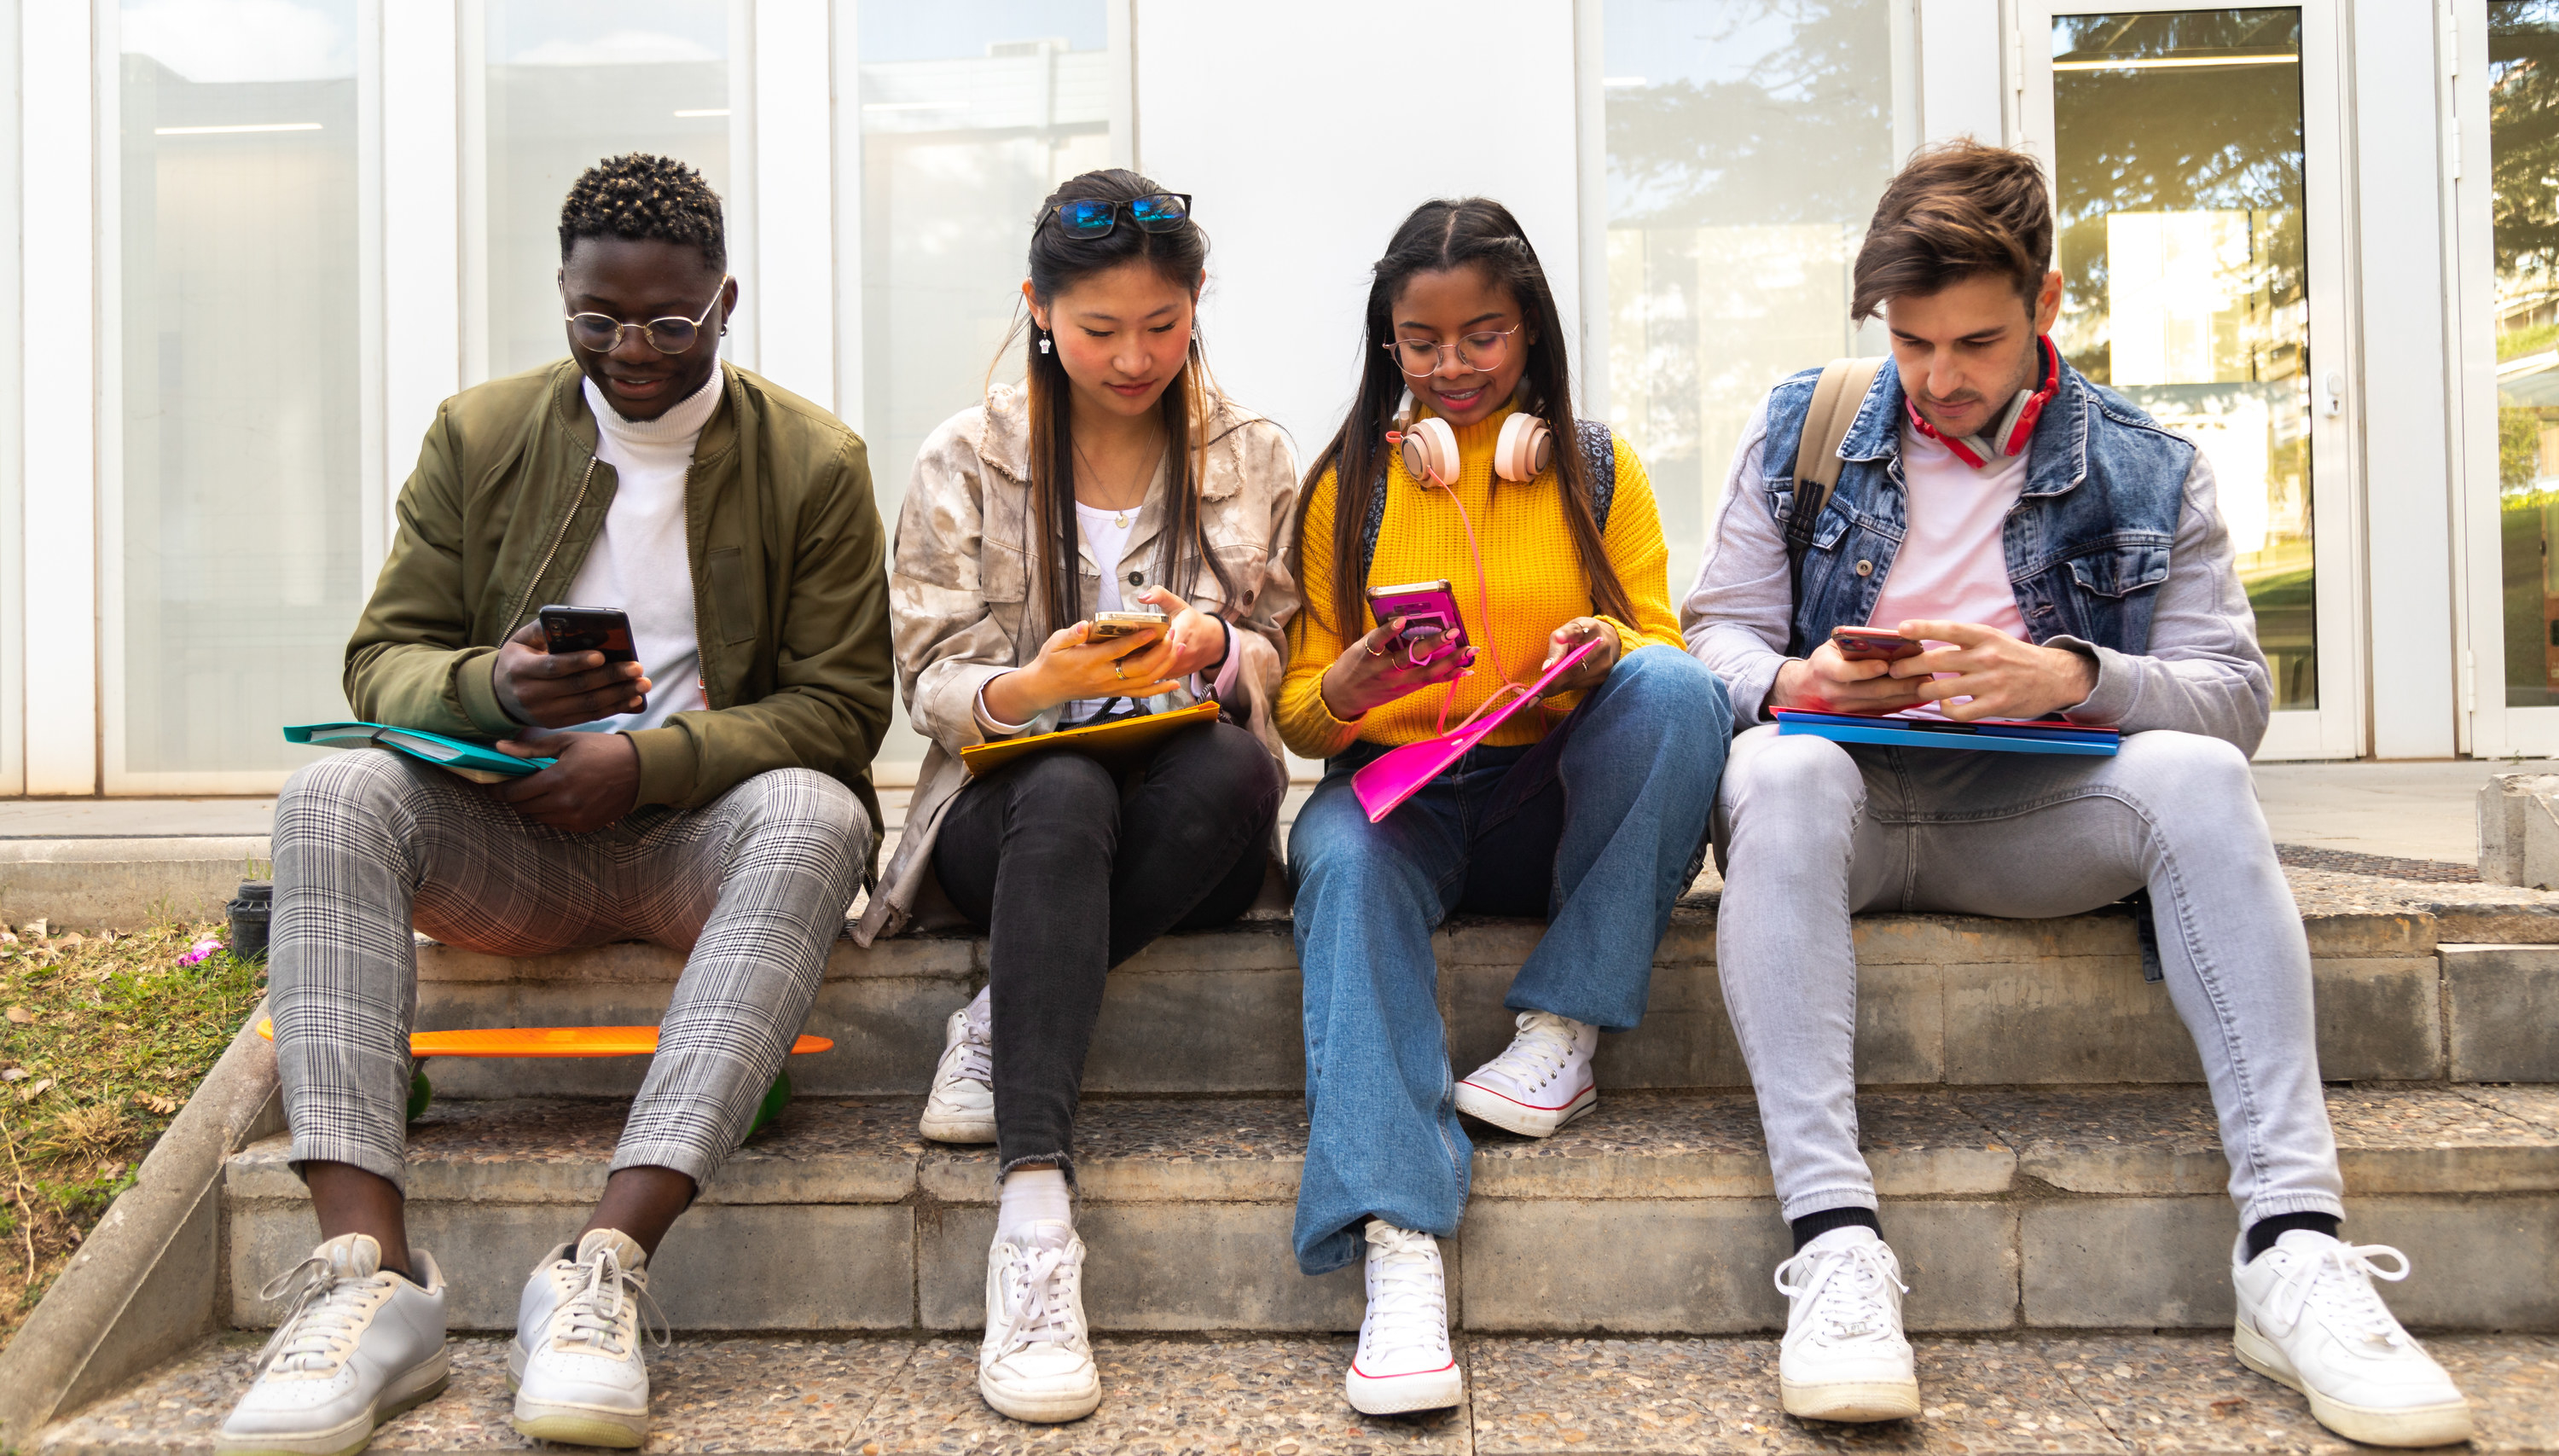 Four students use their phones while sitting next to one another outside